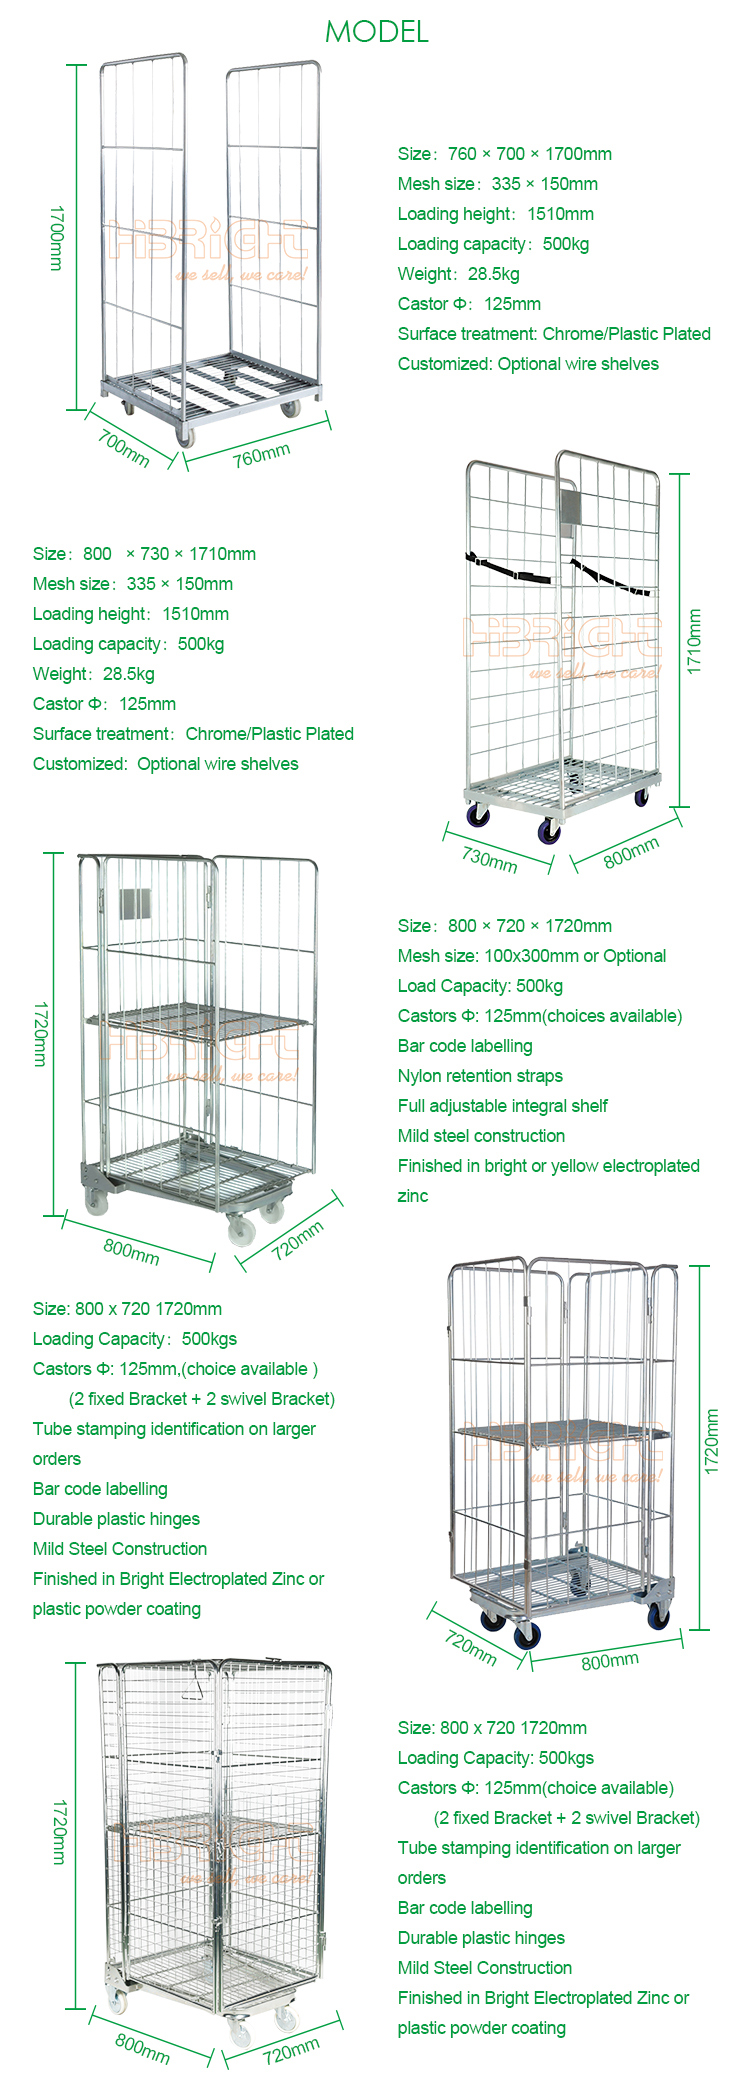 Laundry Cage Cart Trolley Rolling Metal Storage Roll Container